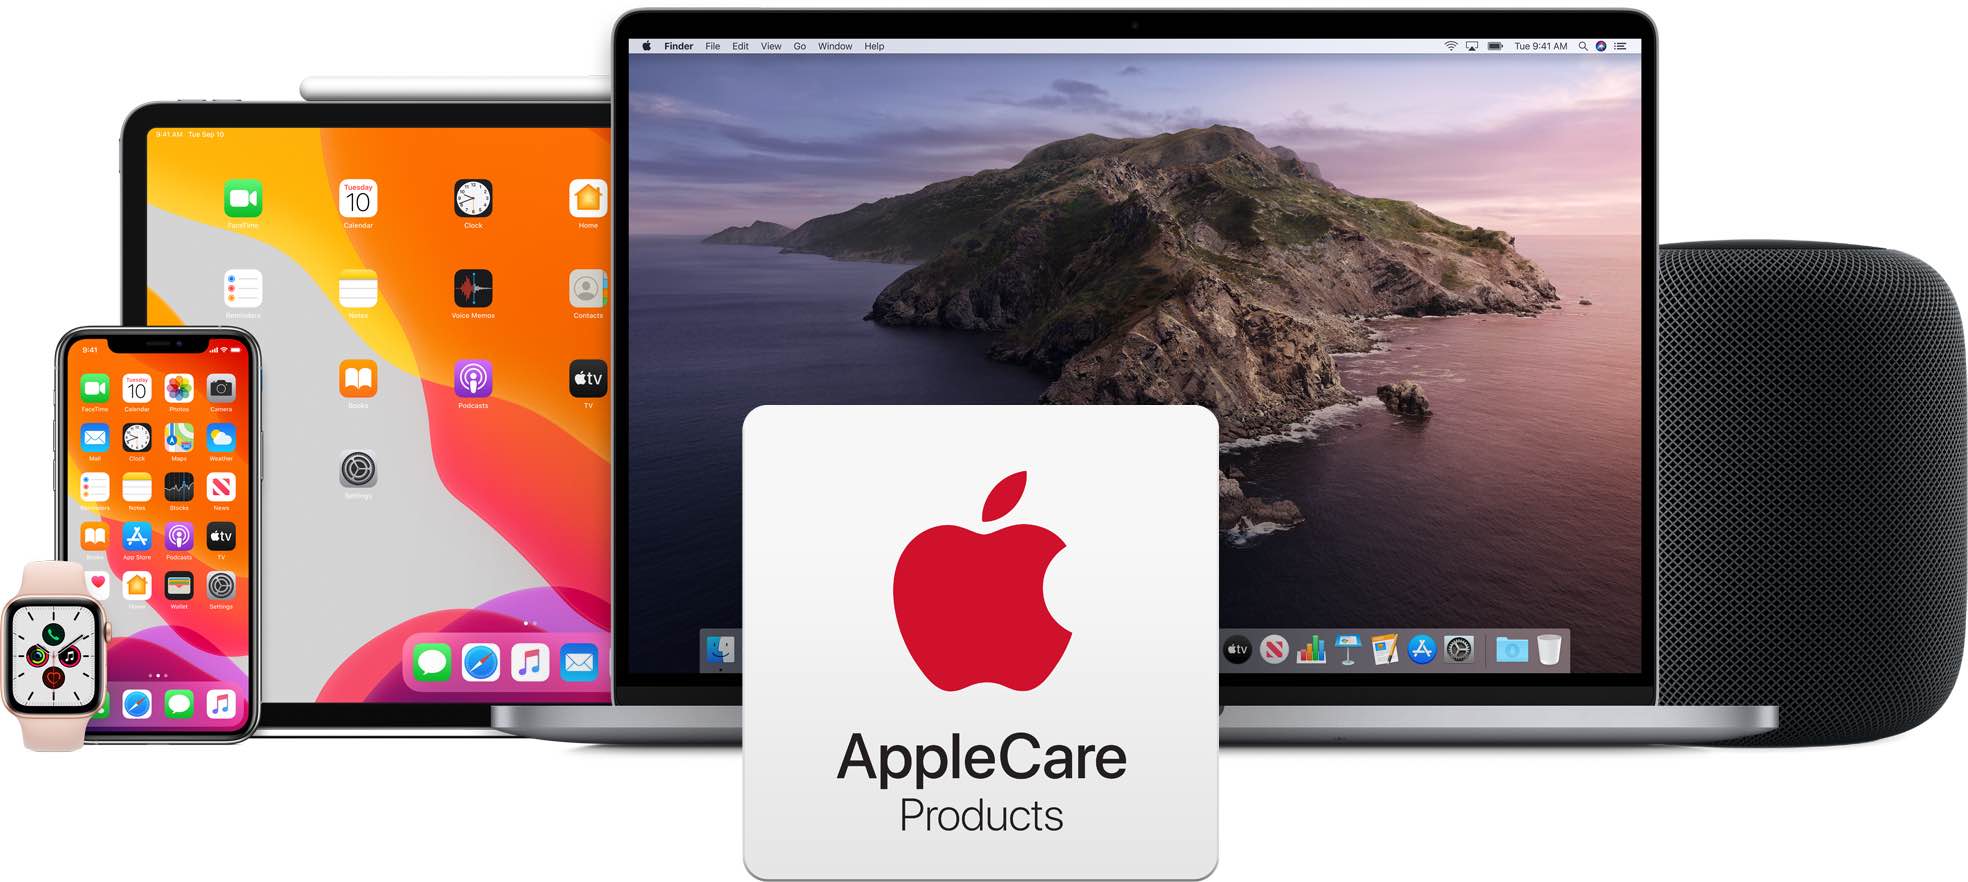 AppleCare marketing image showcasing some of the eligible devices like iPhone, iPad, MacBook and HomePod